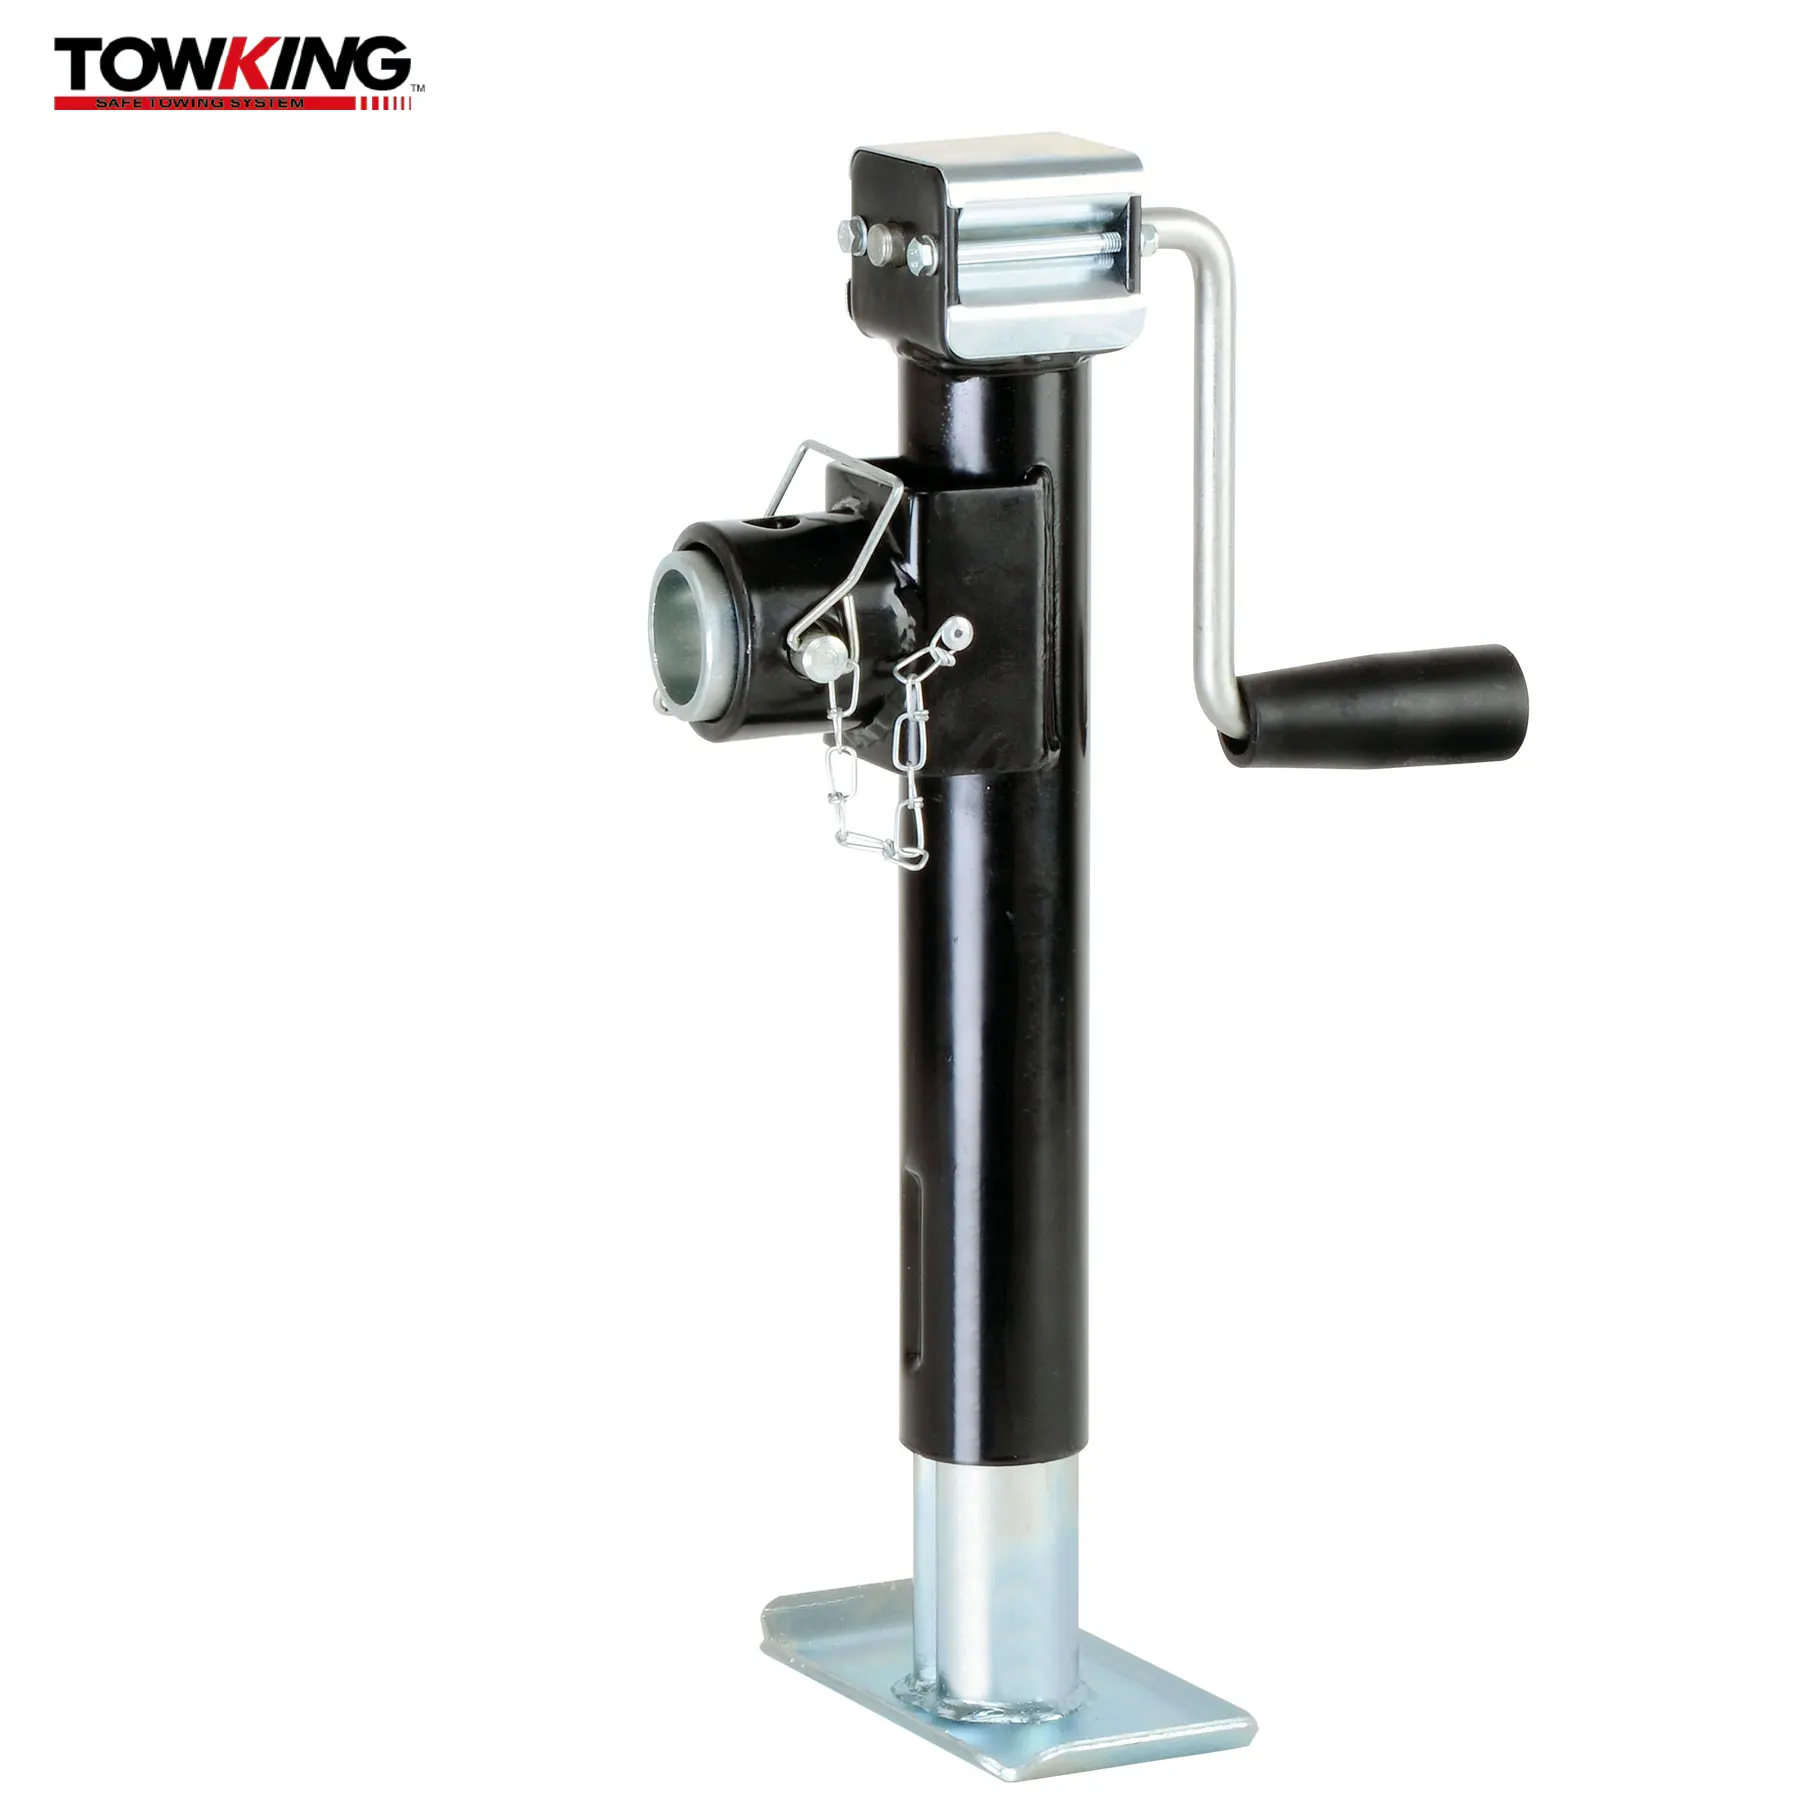 TOWKING Trailer Tongue Support Stand